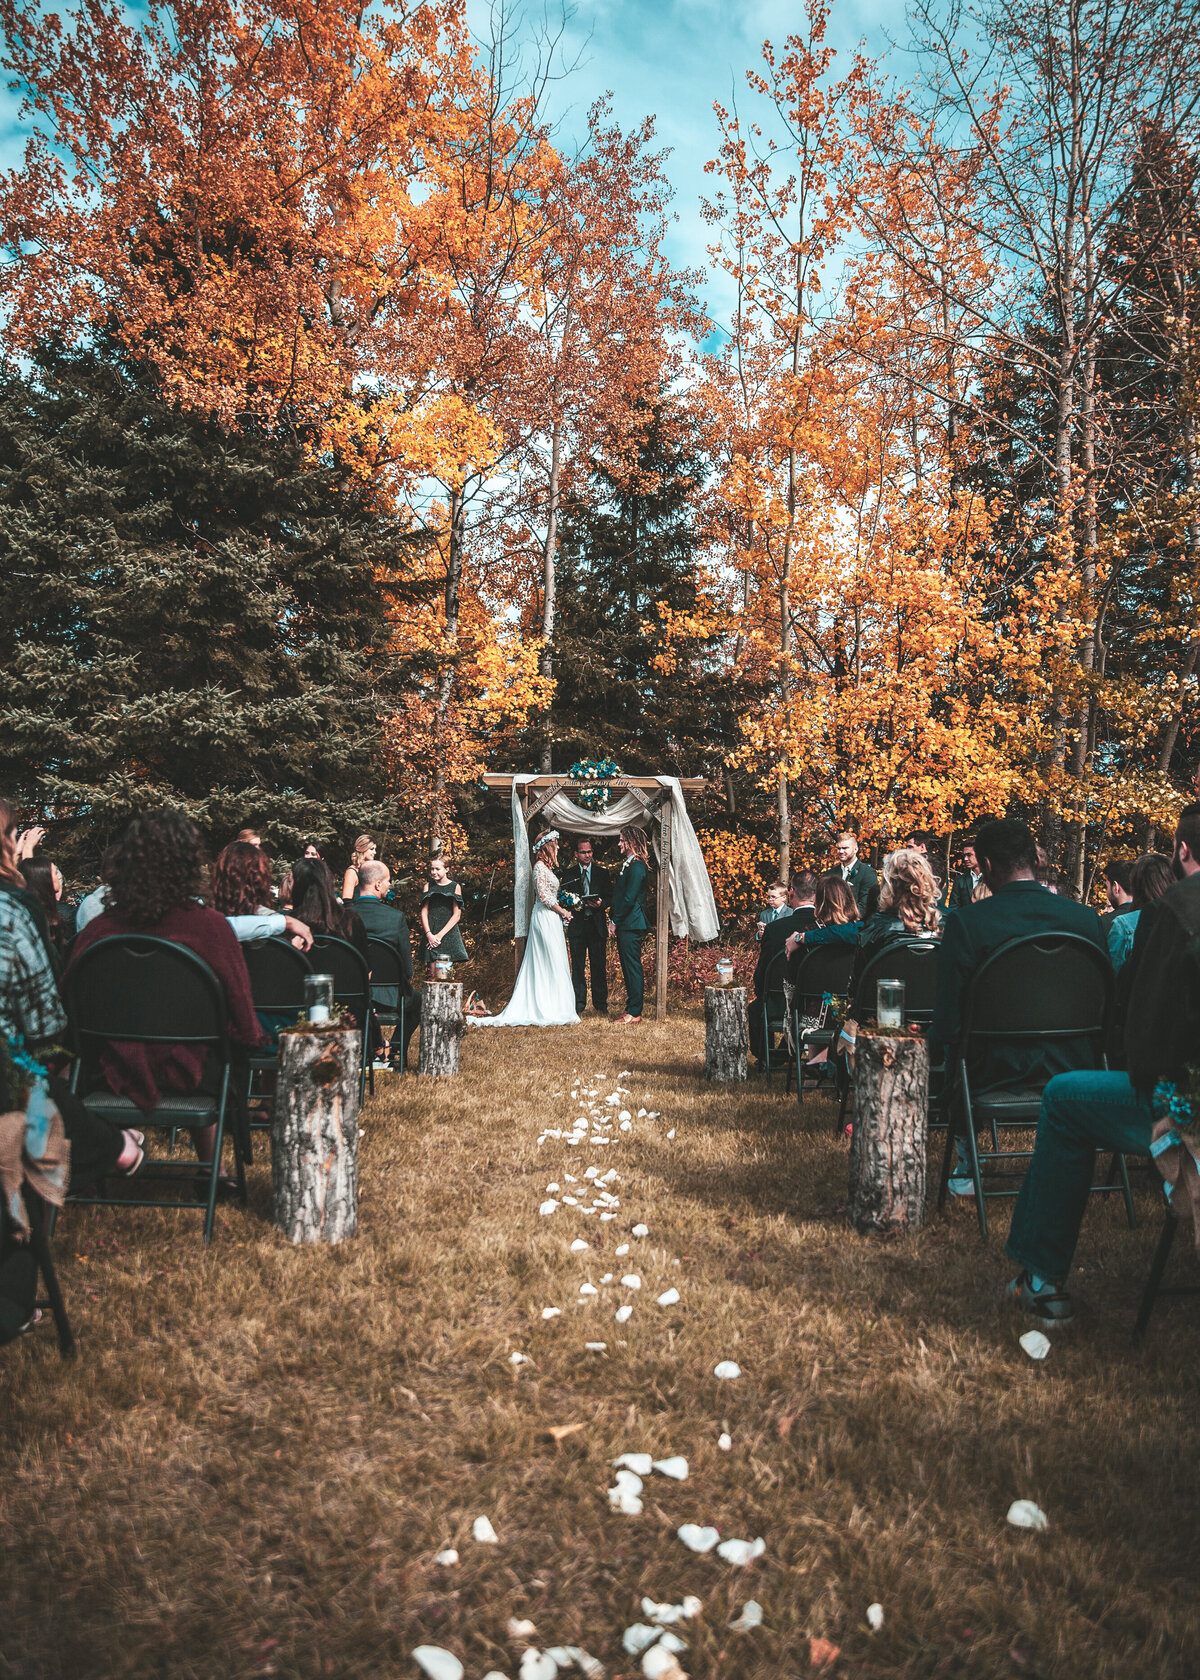 A couple get married outdoors in front of the guests on a grass aisle by a forest in Canada.